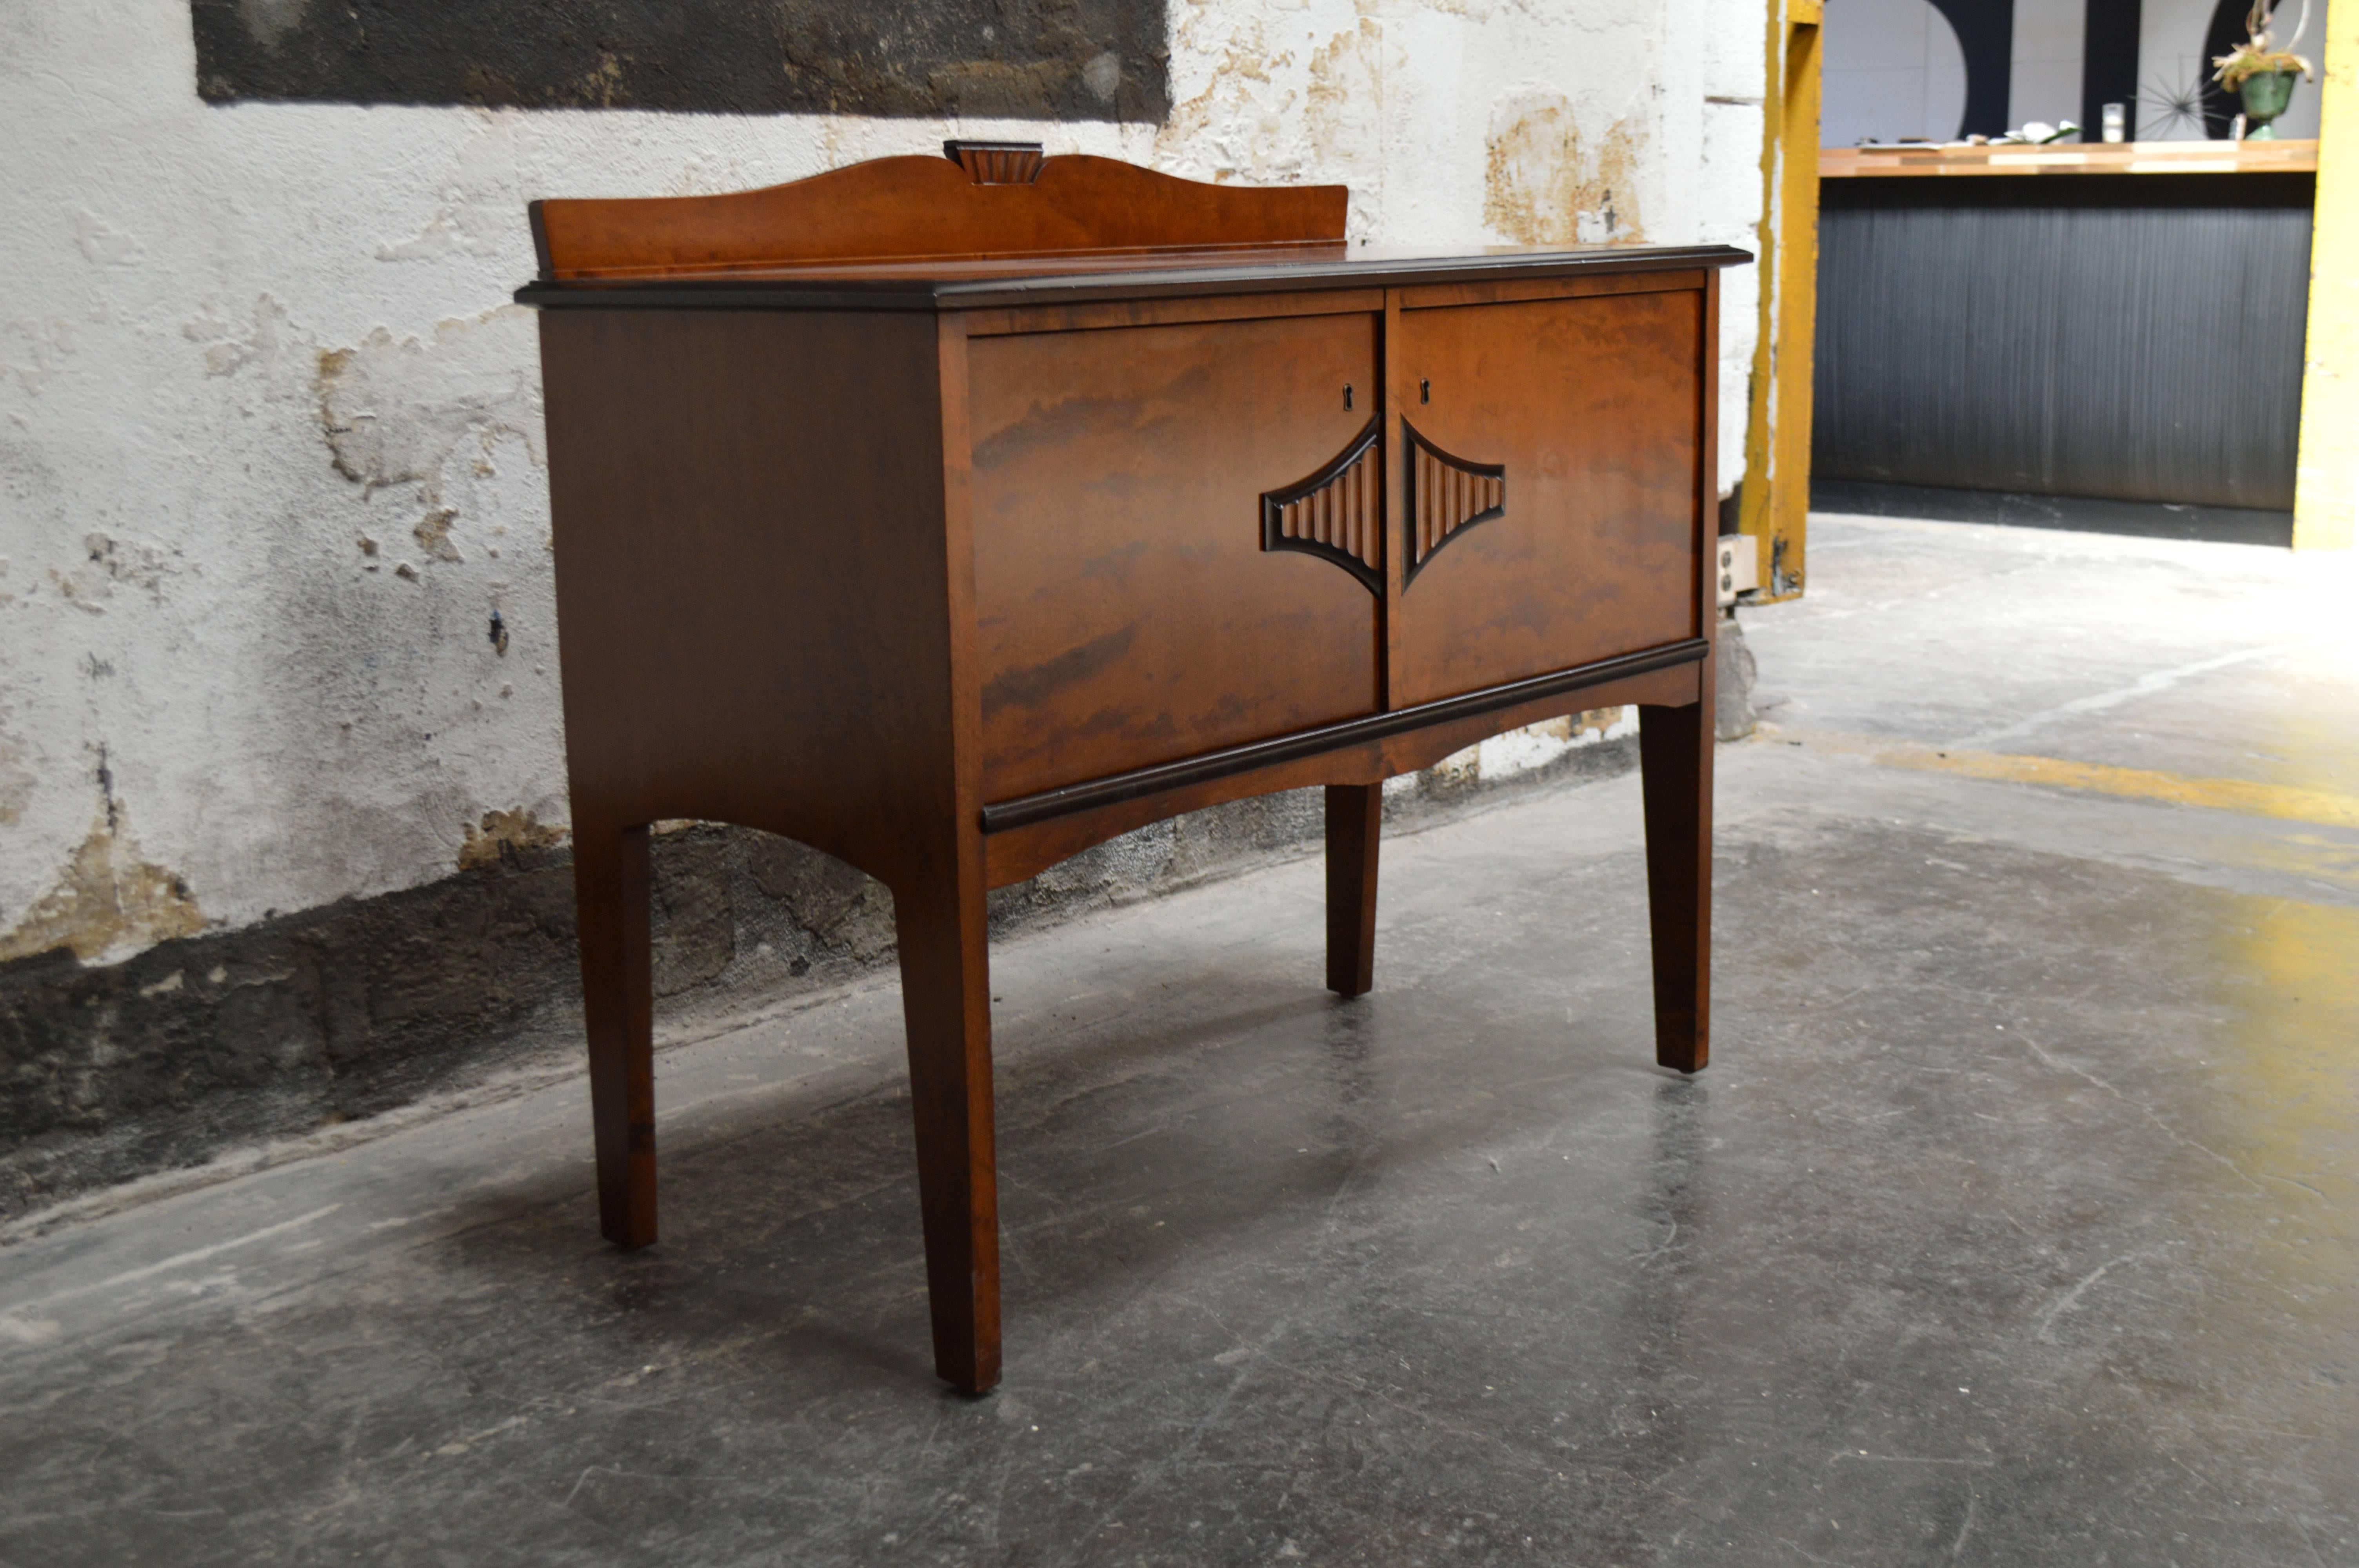 Gorgeous Swedish neoclassical buffet, sideboard or server with dark golden birch with ebonized trim. Two doors open to reveal shelving. Beautifully detailed with carvings on the doors and gracefully curved detailed back-splash. Note: larger matching